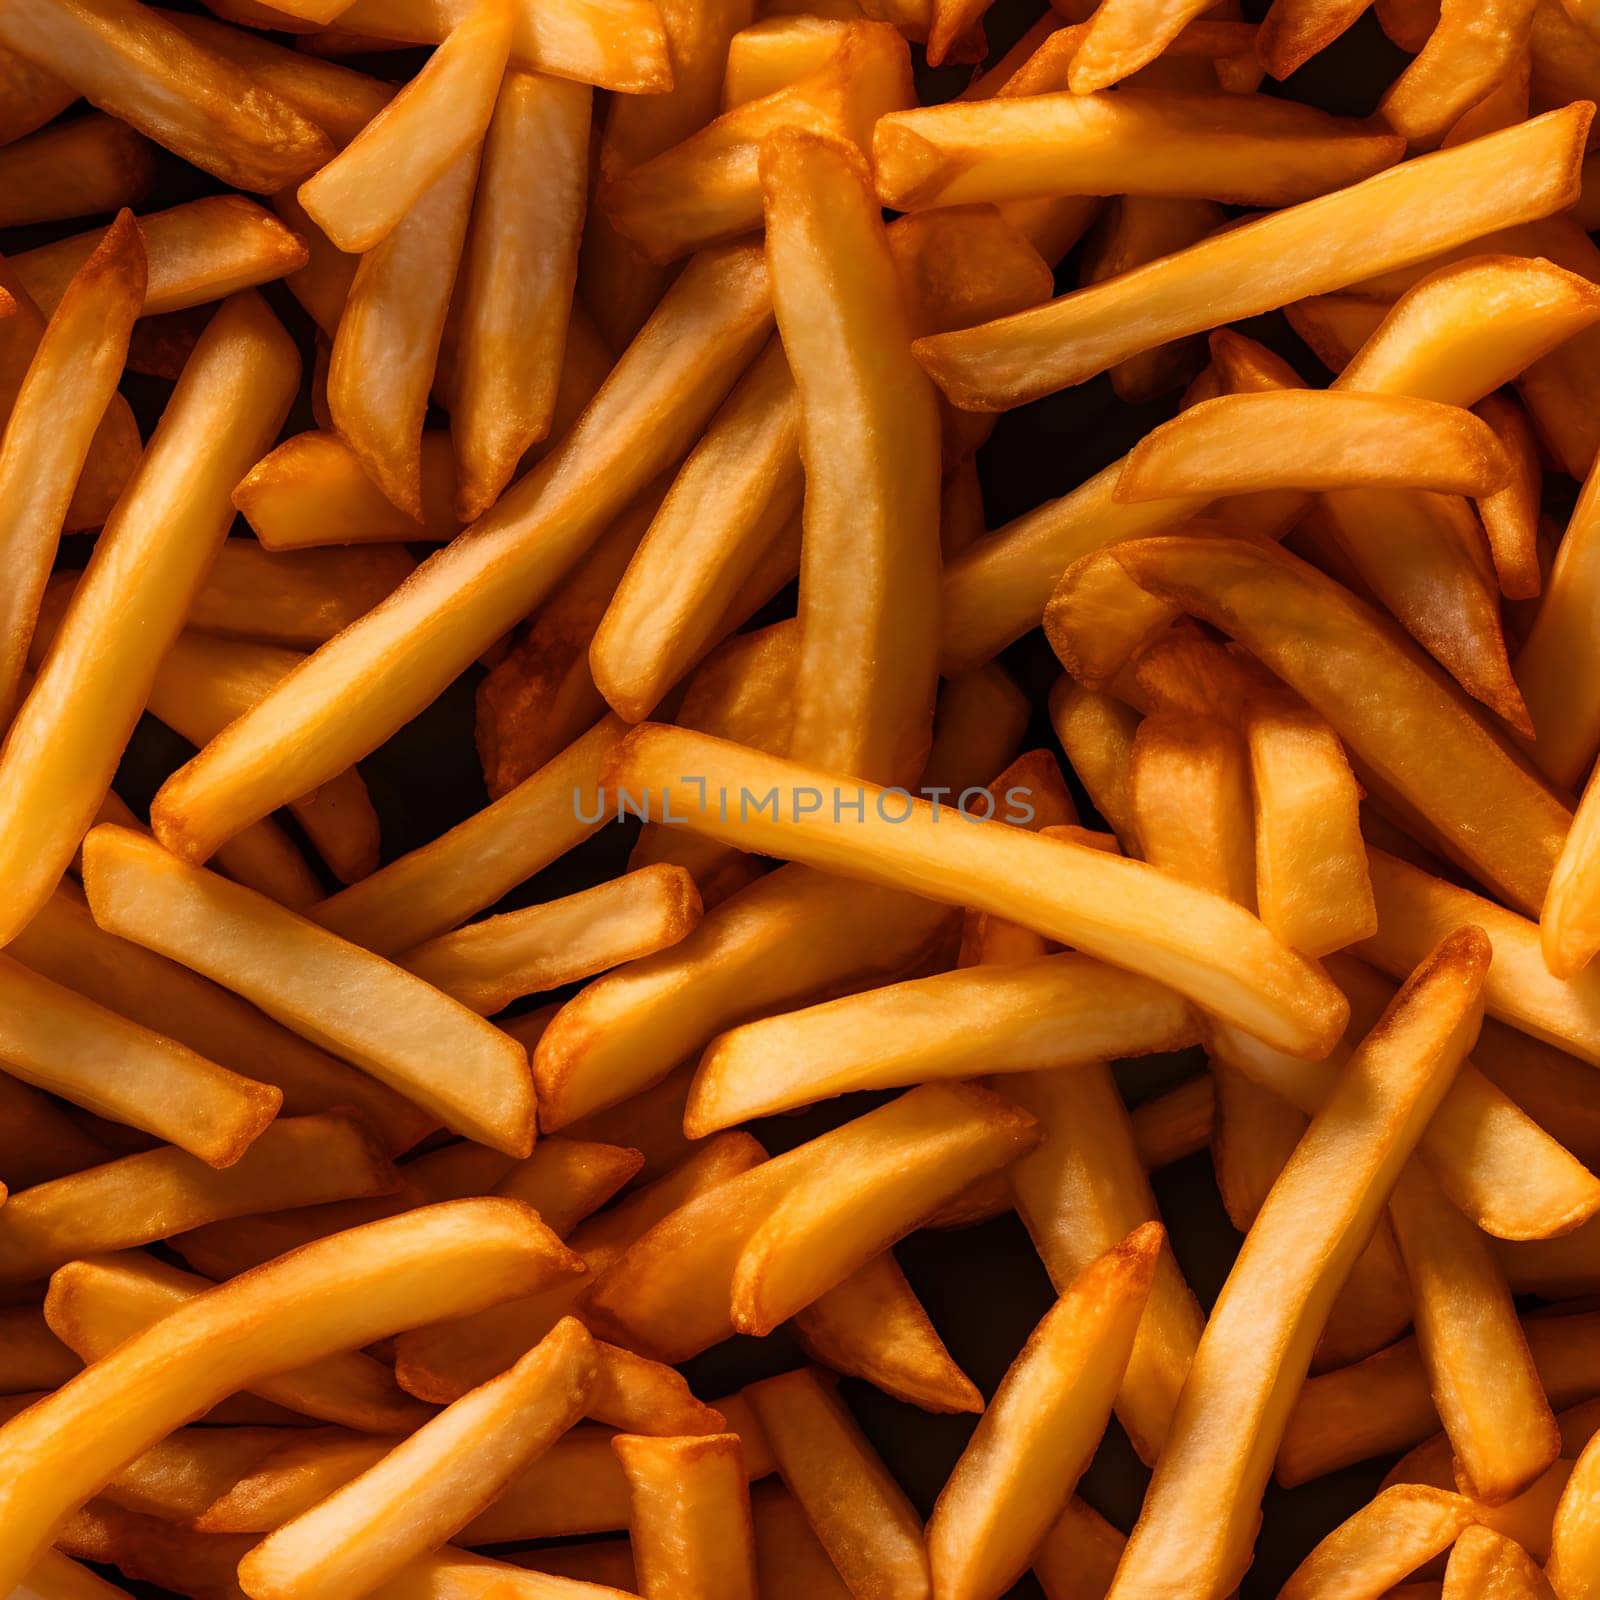 seamless texture and full-frame background of piled French fries, neural network generated image by z1b